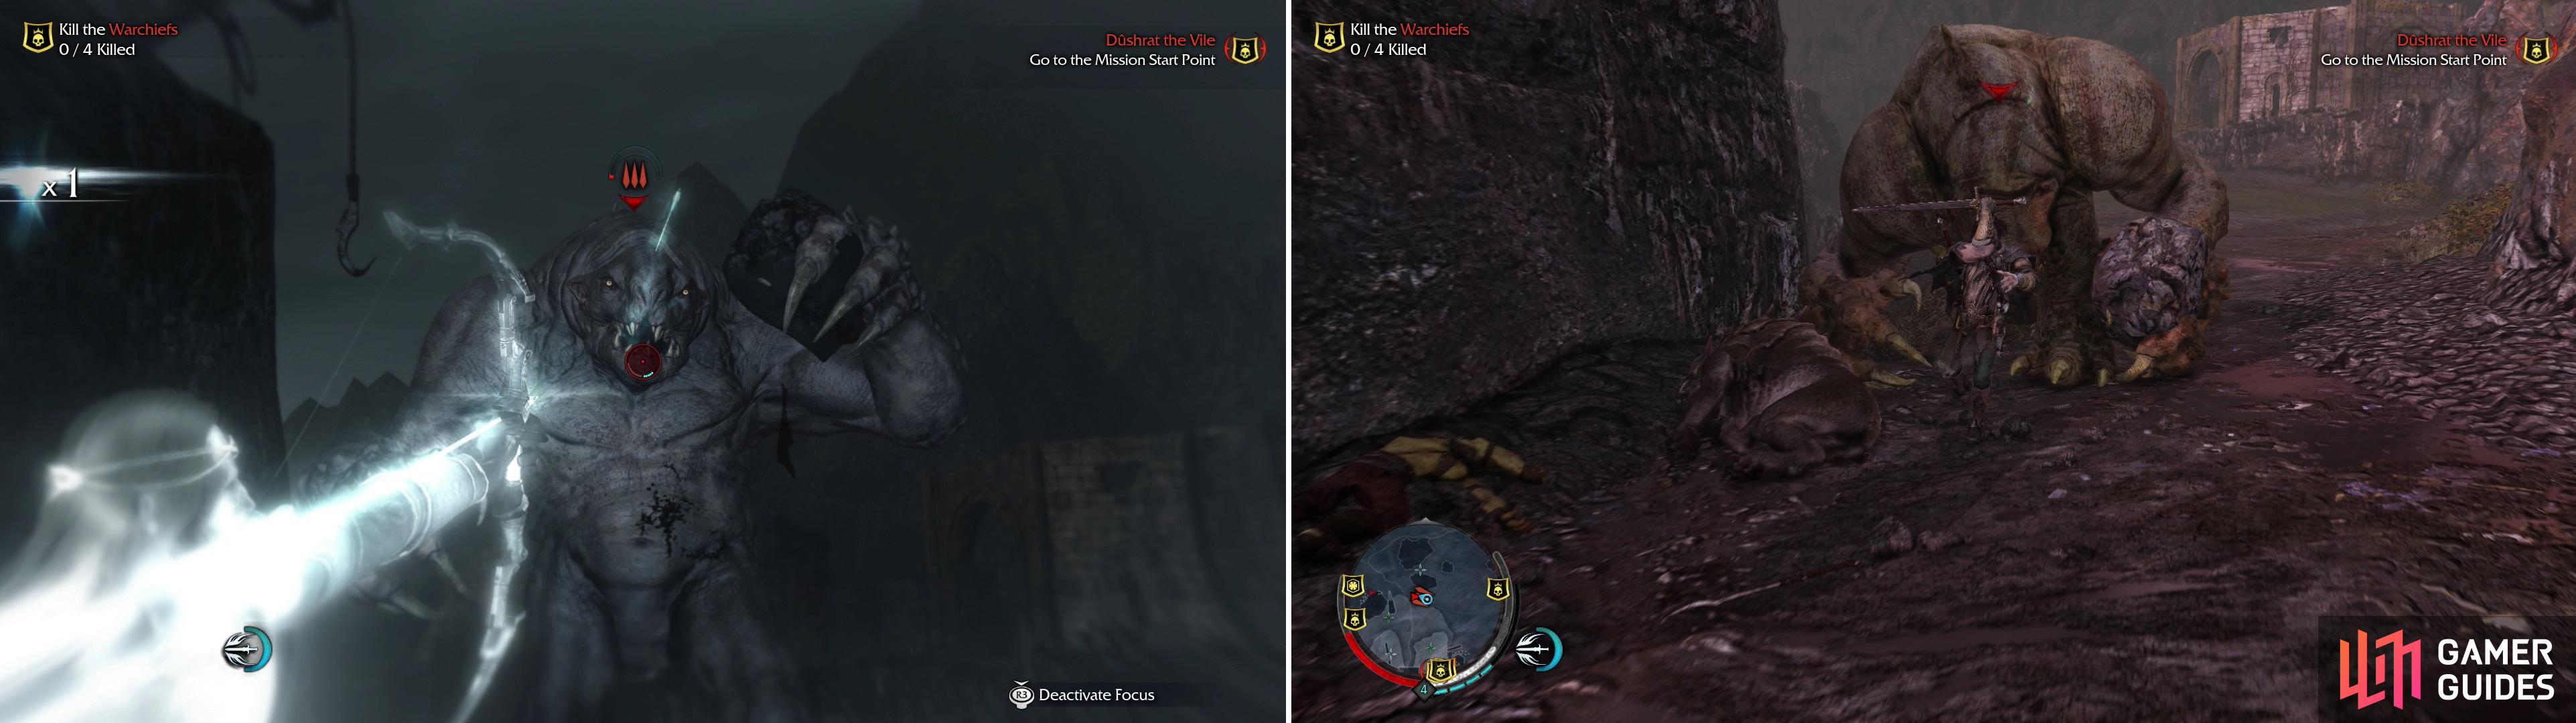 Graugs are mighty foes, but they can be defeated at this point in the game. Stun them by shooting them in the head (left), then close for a few quick sword swipes before they regain their footing (right).